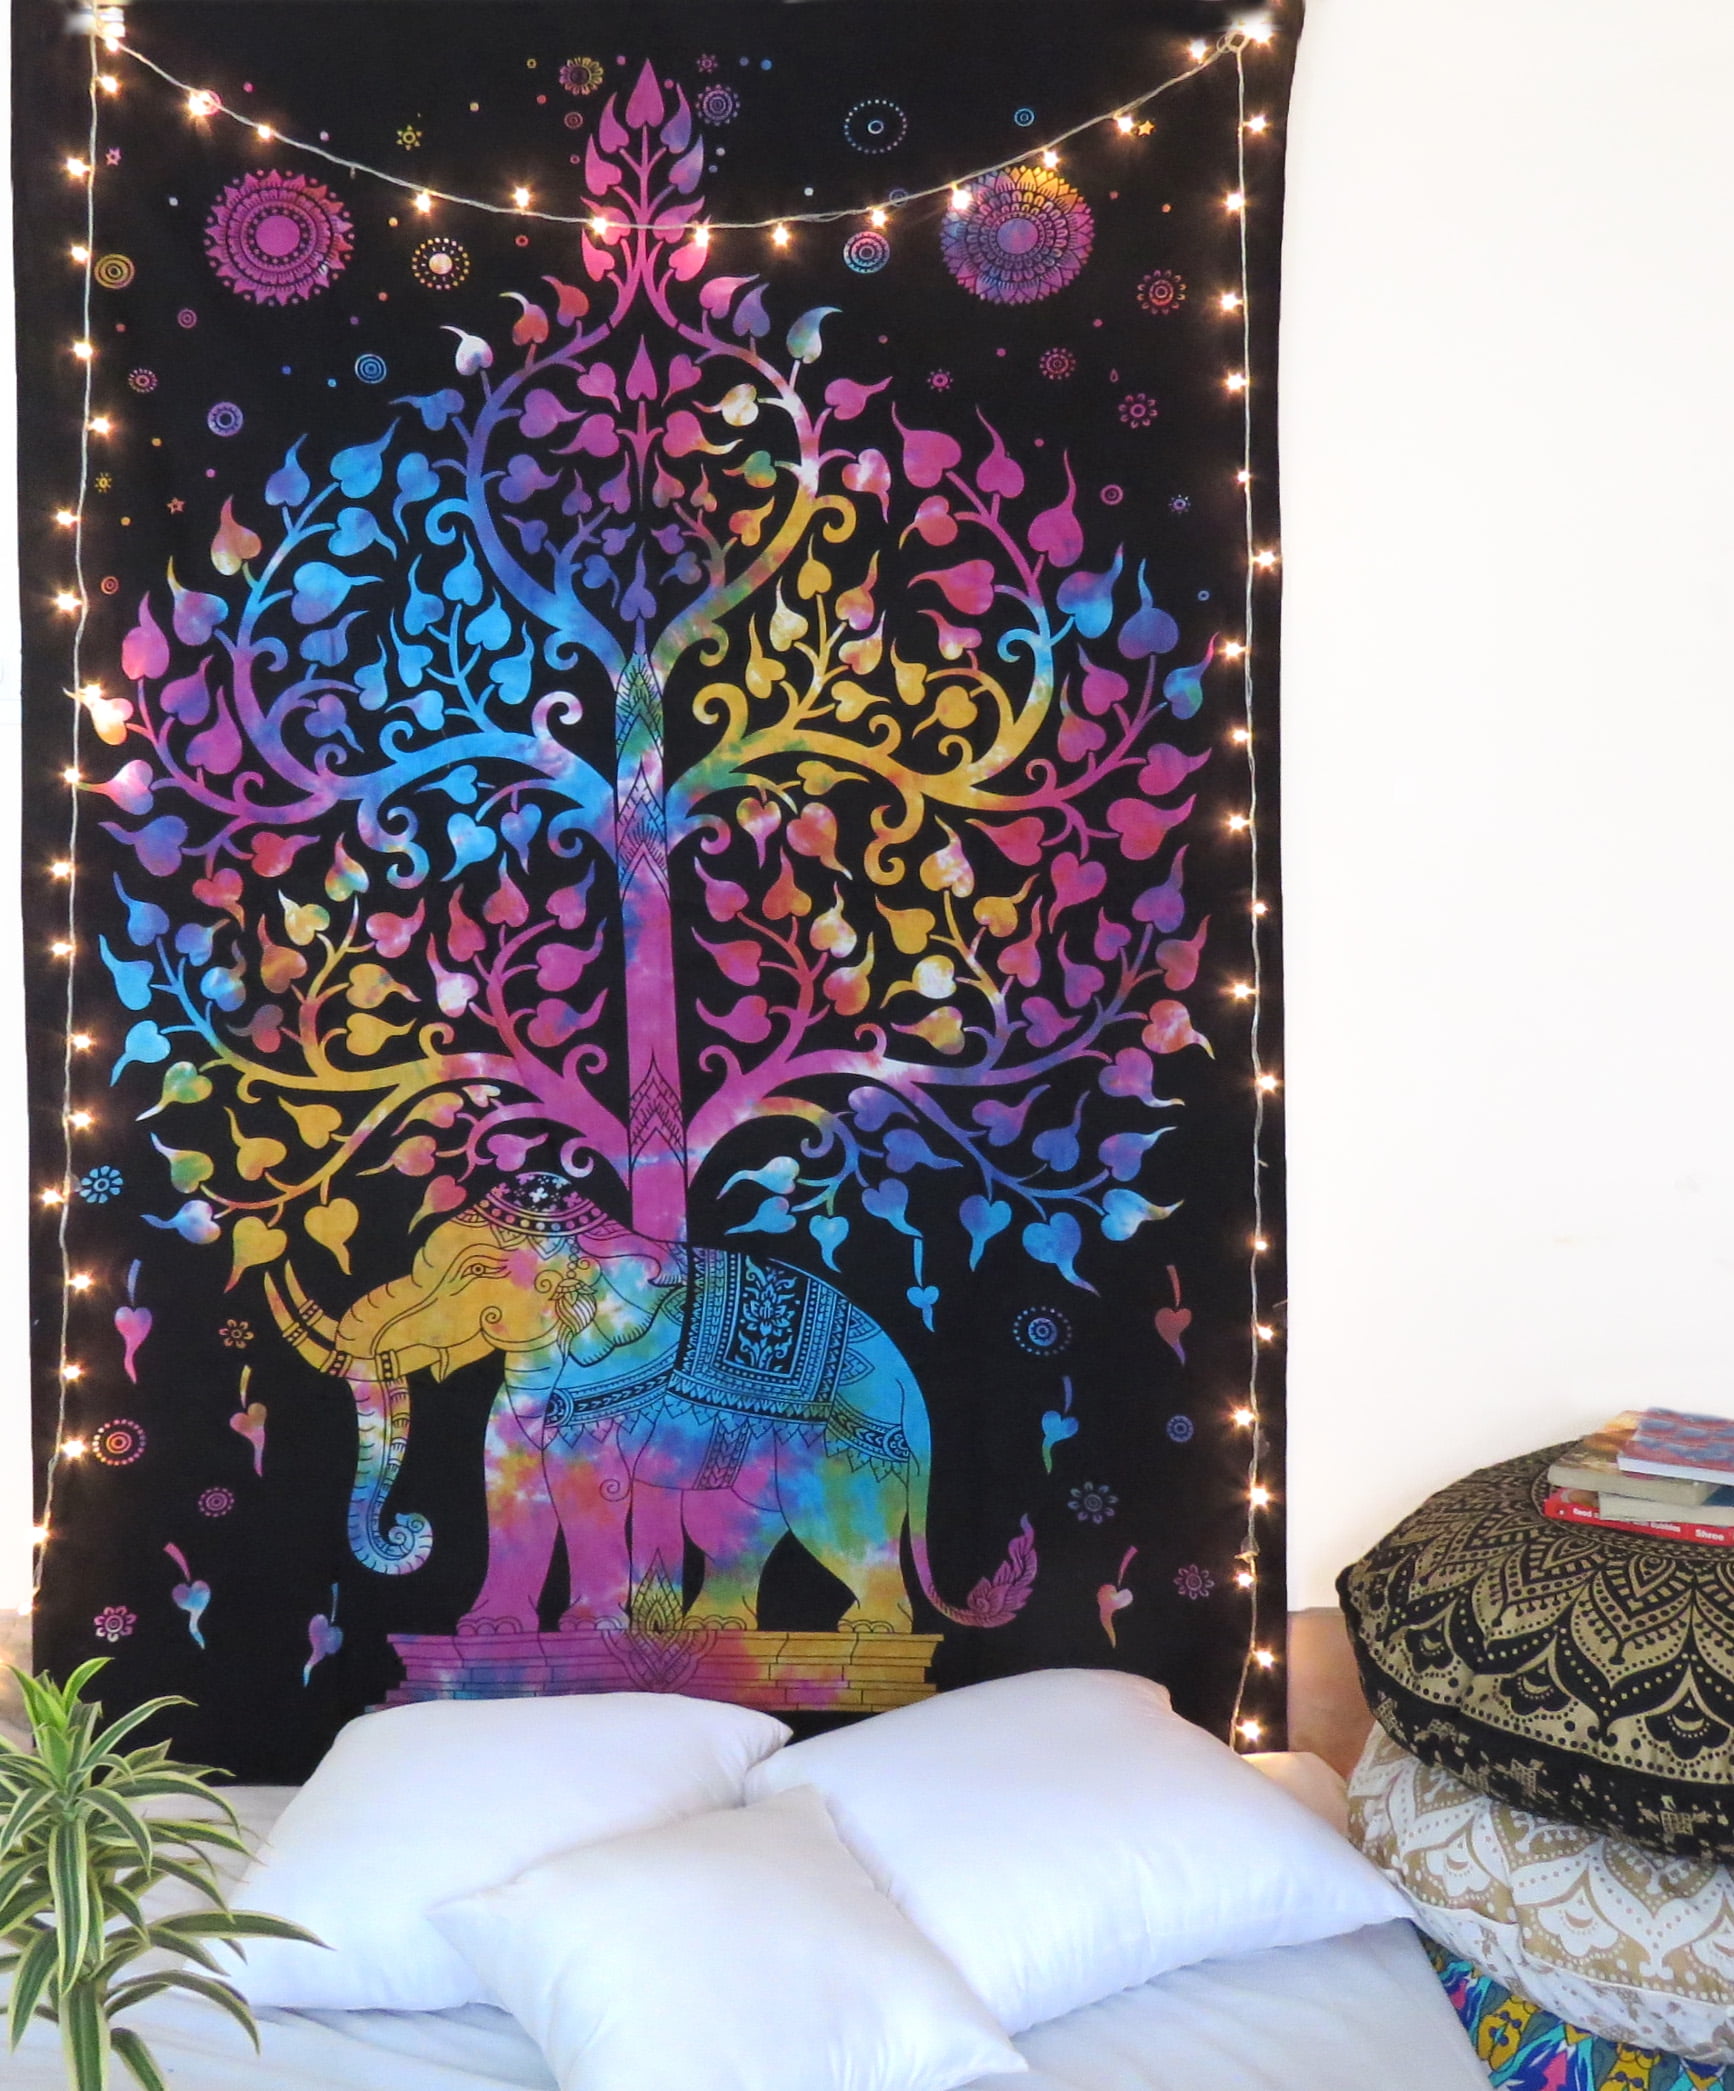 Tie Dye Big Indian Elephant print cotton double bedspread wall hanging hippy 